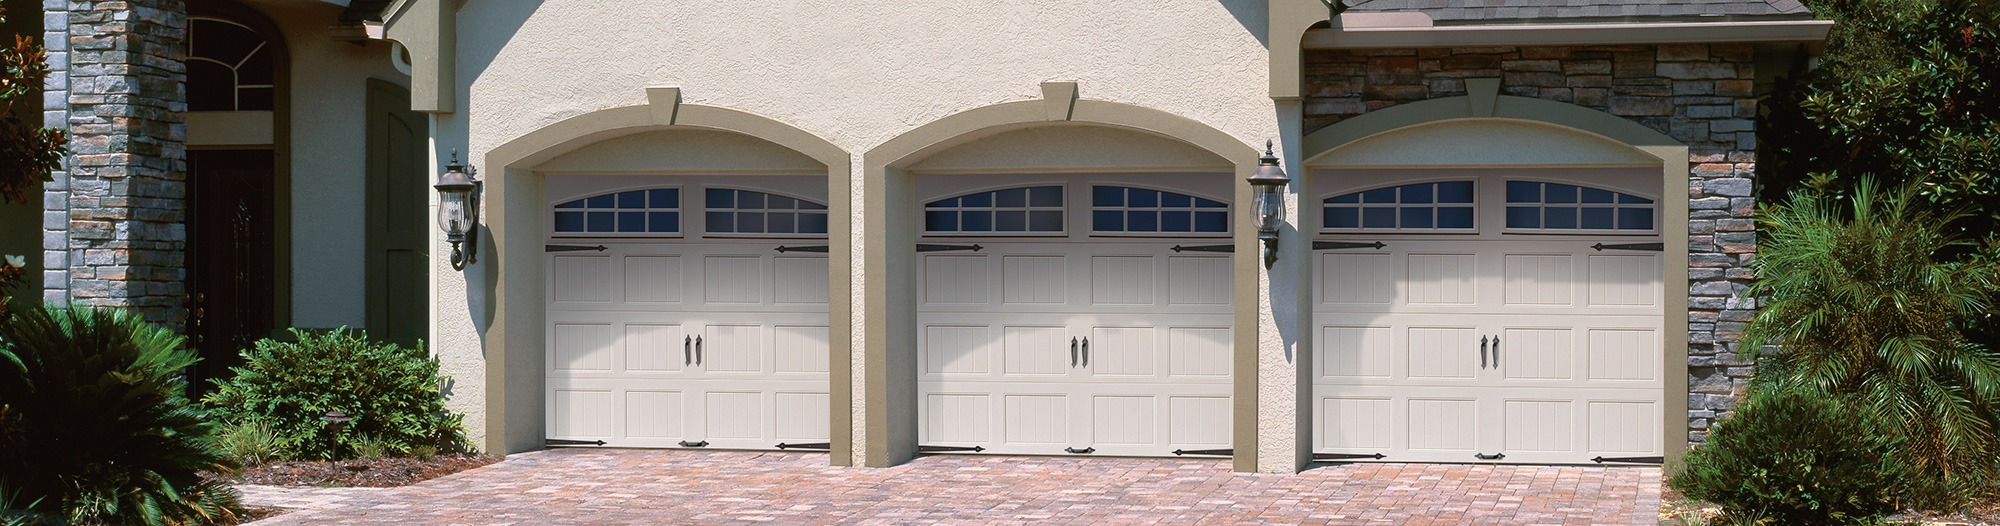 Contact Us Consolidated Garage Doors Serving Northern Il